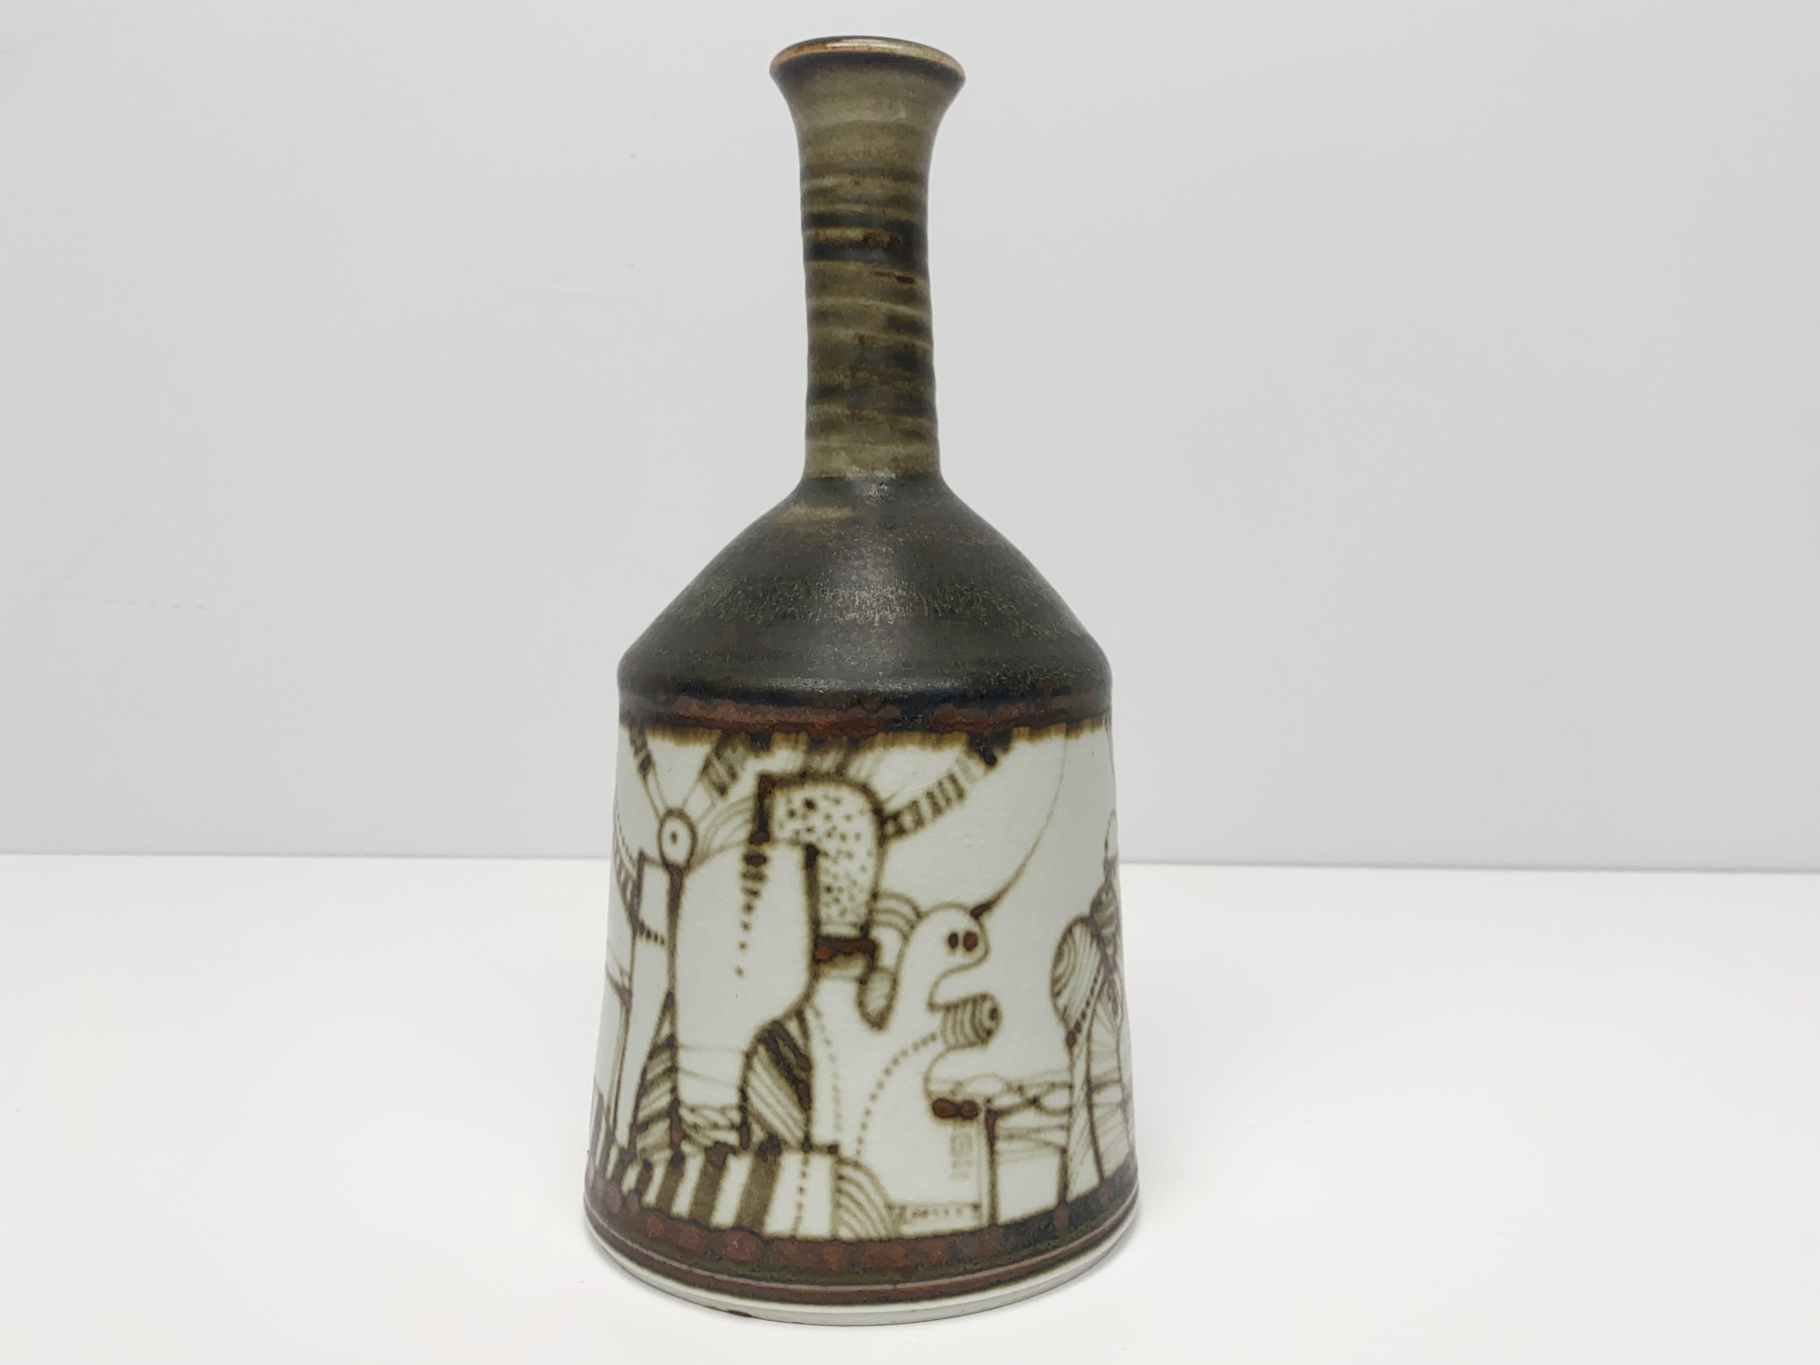 Vase, Porcelain, Unique Piece, Painting with Iron Oxide on Matte Glaze, by Wilhelm & Elly Kuch, 1980s